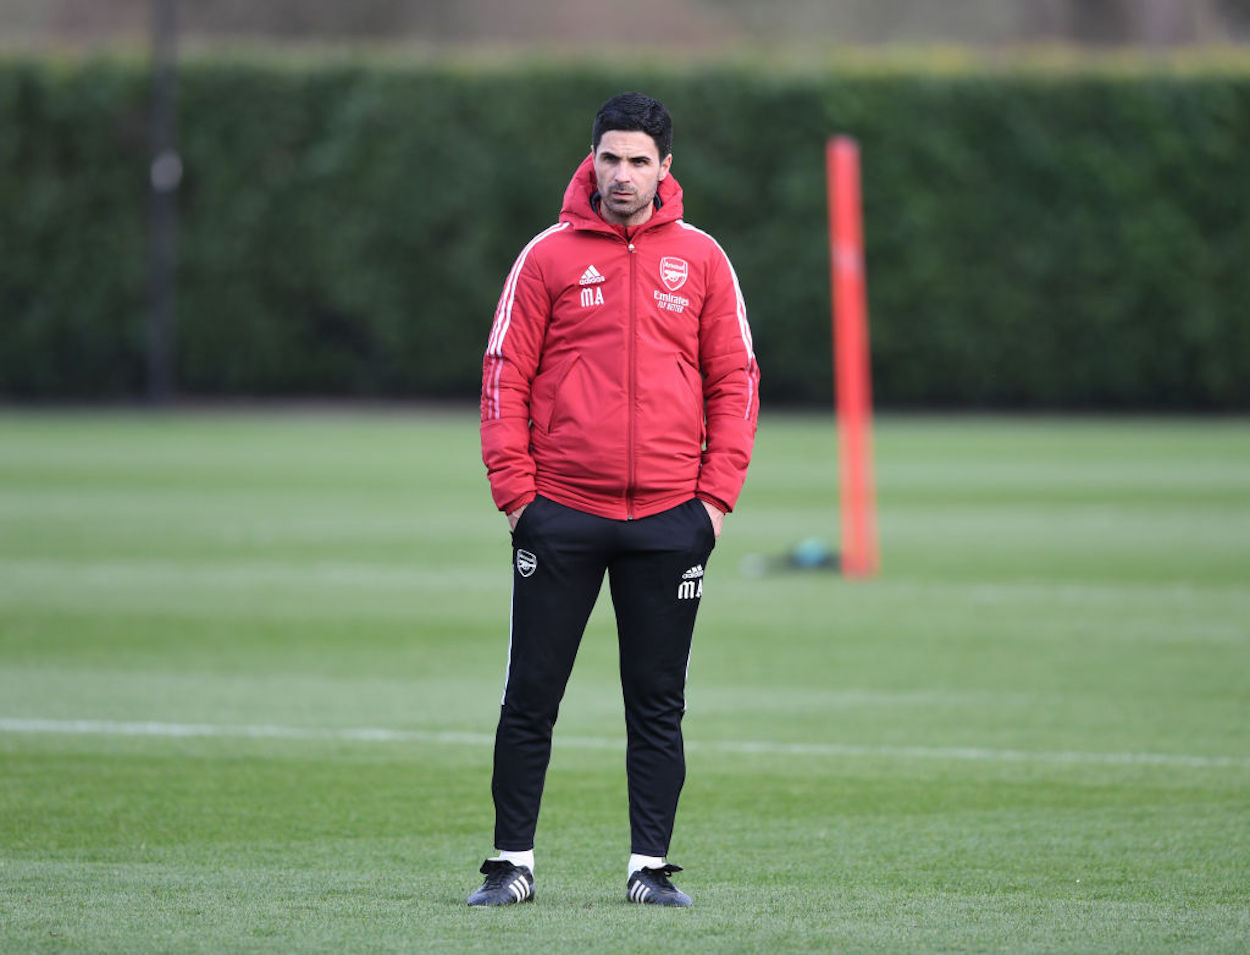 Arsenal manager Mikel Arteta looks on during training.